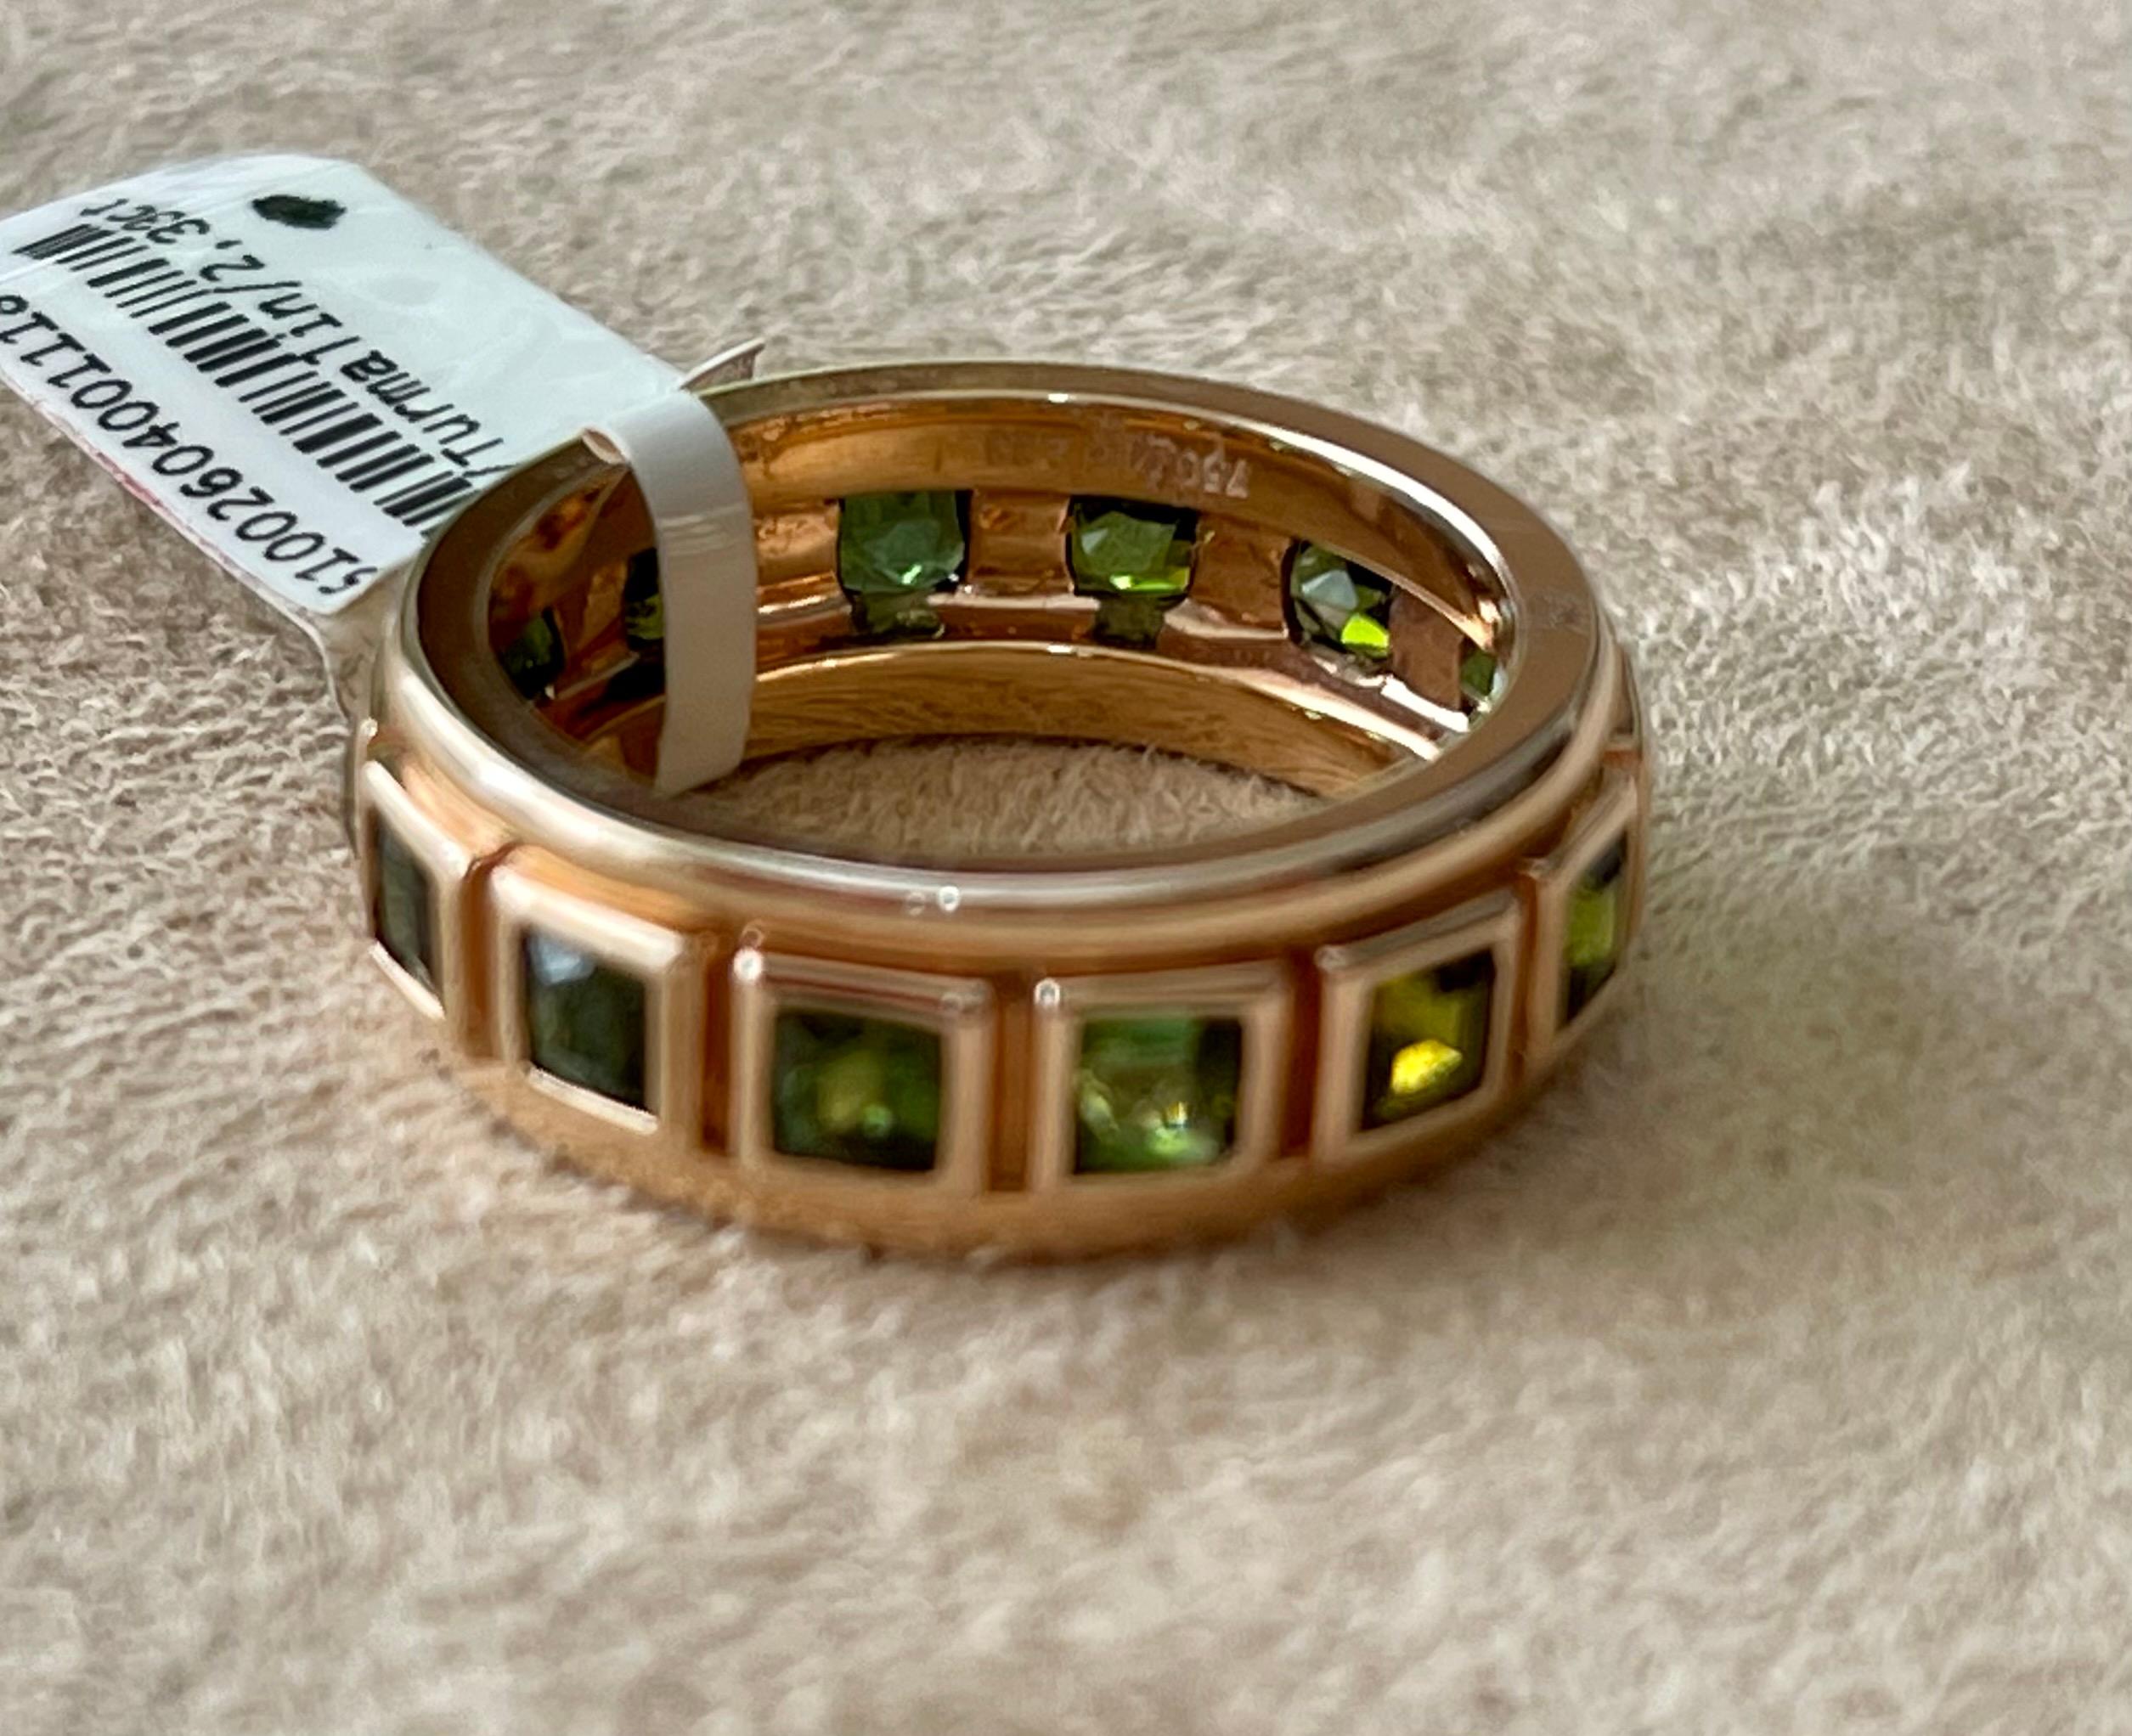 Solid 18 K rose Gold Eternity Ring set with 14 square cut pink Tourmalines weighing 2.33 ct in a solid bezel channel setting. 
Each  stone is faceted and well-matched in shape and color. Natural variations in hue and intensity add to the beauty of